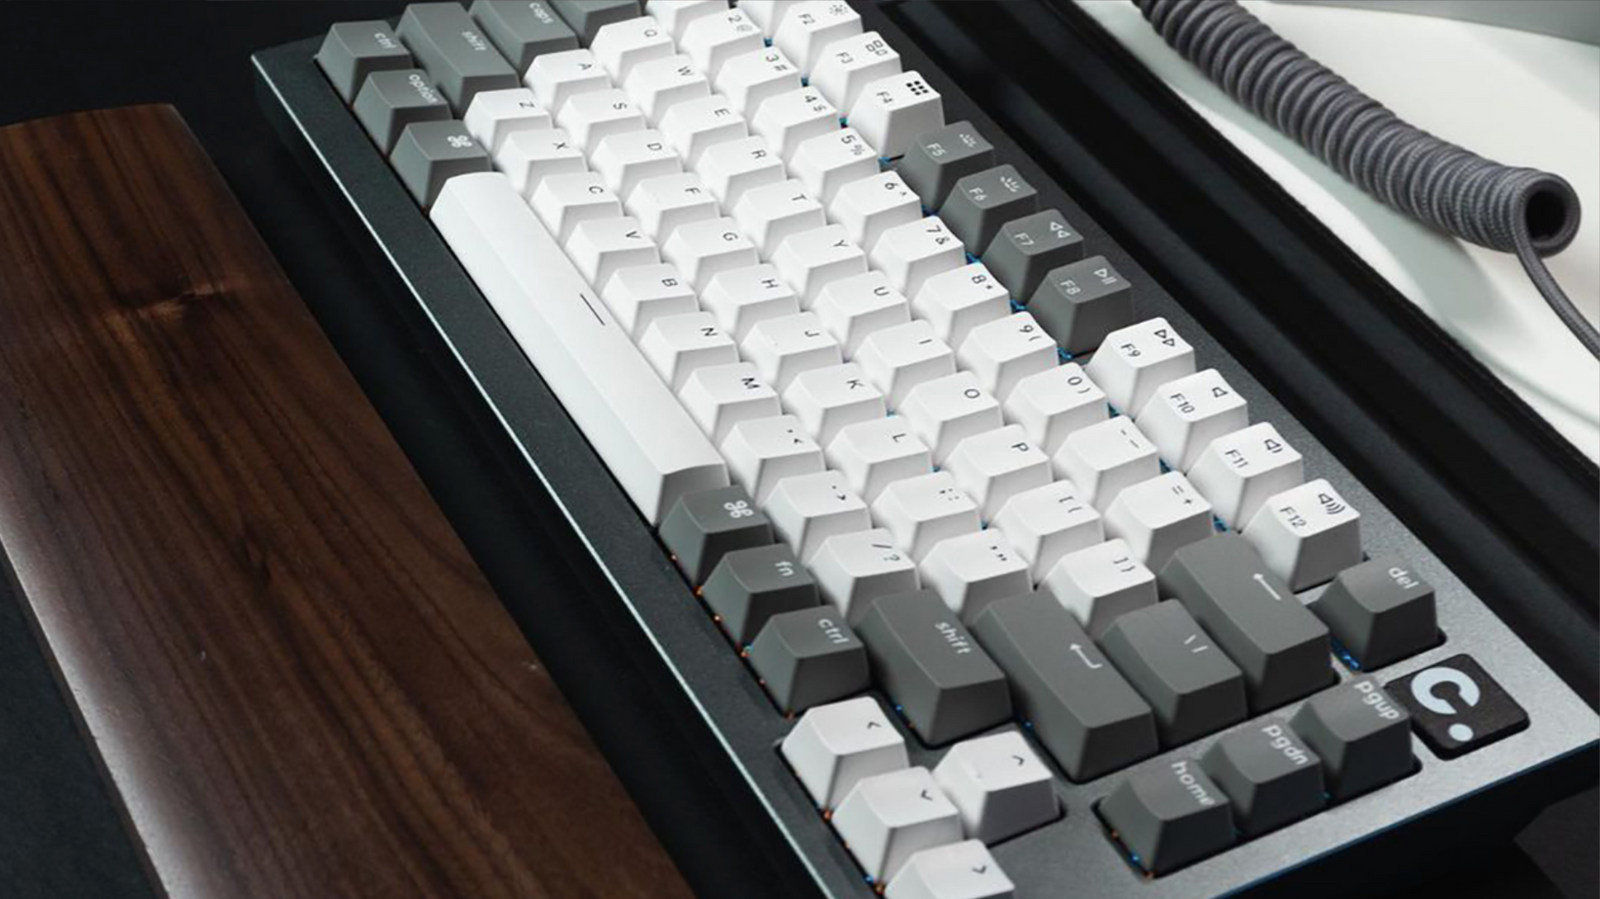 Keychron Keyboard Article Review - November 2021